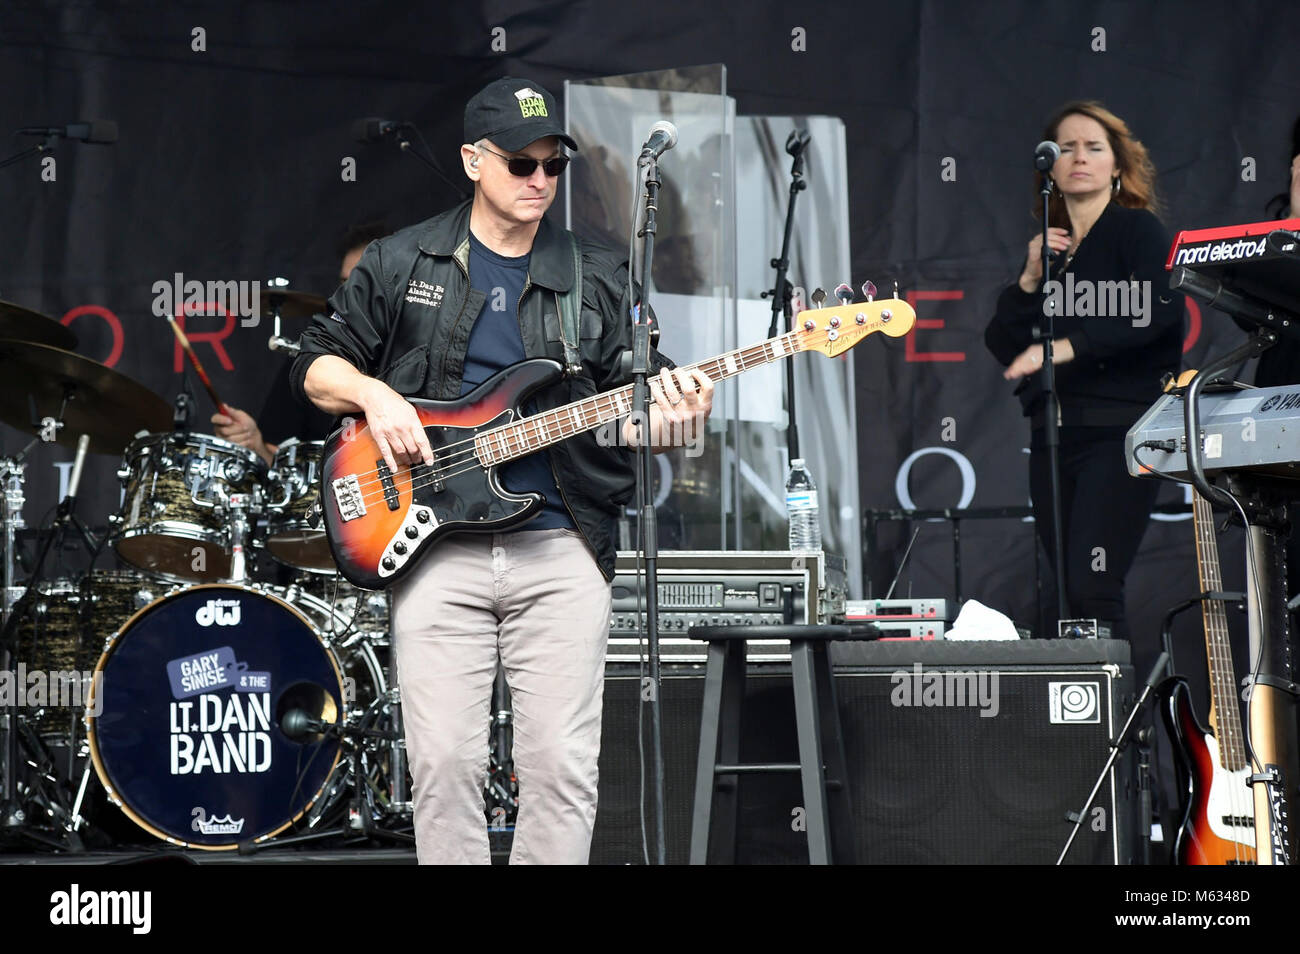 SAN DIEGO (Feb. 10, 2018) Actor, musician, and humanitarian Gary Sinise and the Lt. Dan Band performed at Naval Medical Center San Diego (NMCSD) during their sixth annual Invincible Spirit Festival. The festival included a three-hour concert by the band, activities for children, a rock-climbing wall, food cooked by Team Irvine, and 149 volunteers who set up and served food at the event. Gary Sinise and Lt. Dan Band debuted their first military concert at NMCSD in 2012. (U.S. Navy Stock Photo